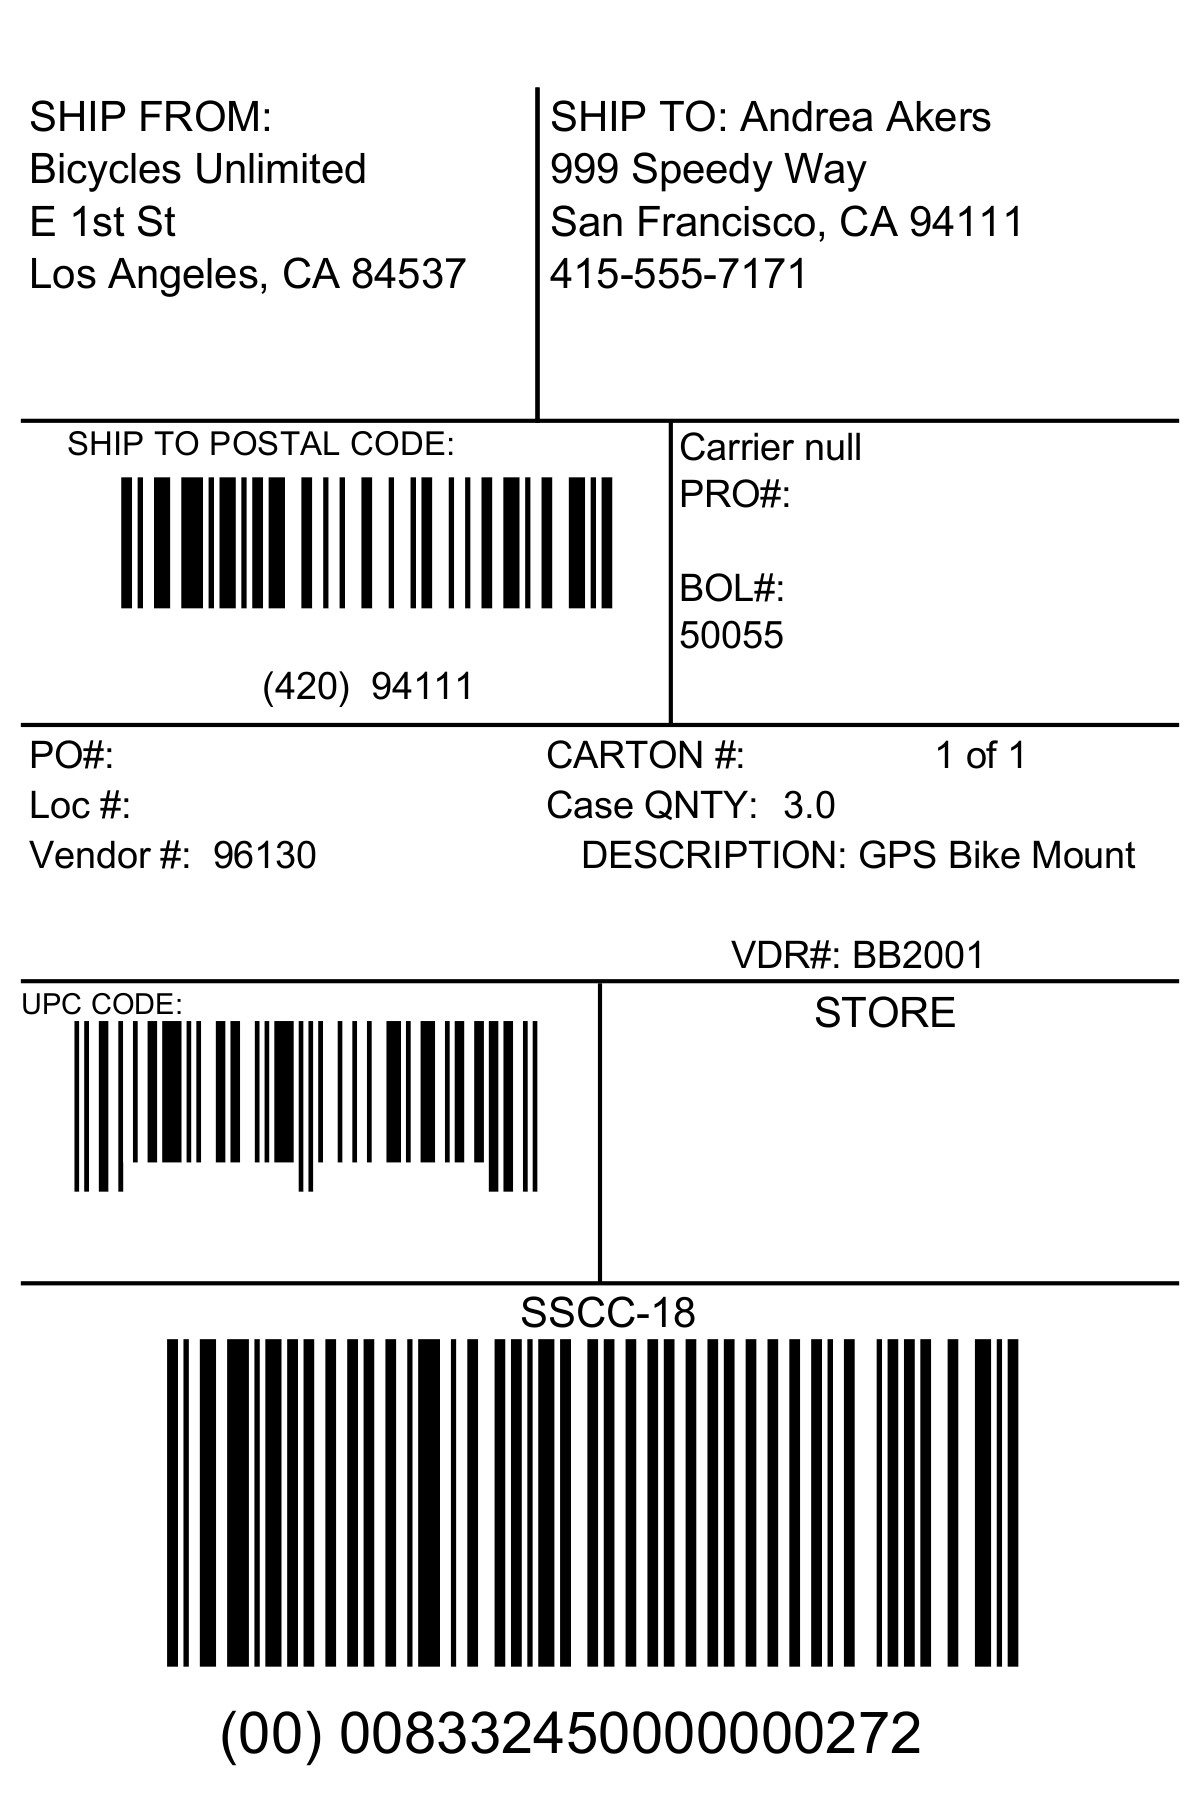 Fishbowl Labels and Barcodes EDI 856 Cabela